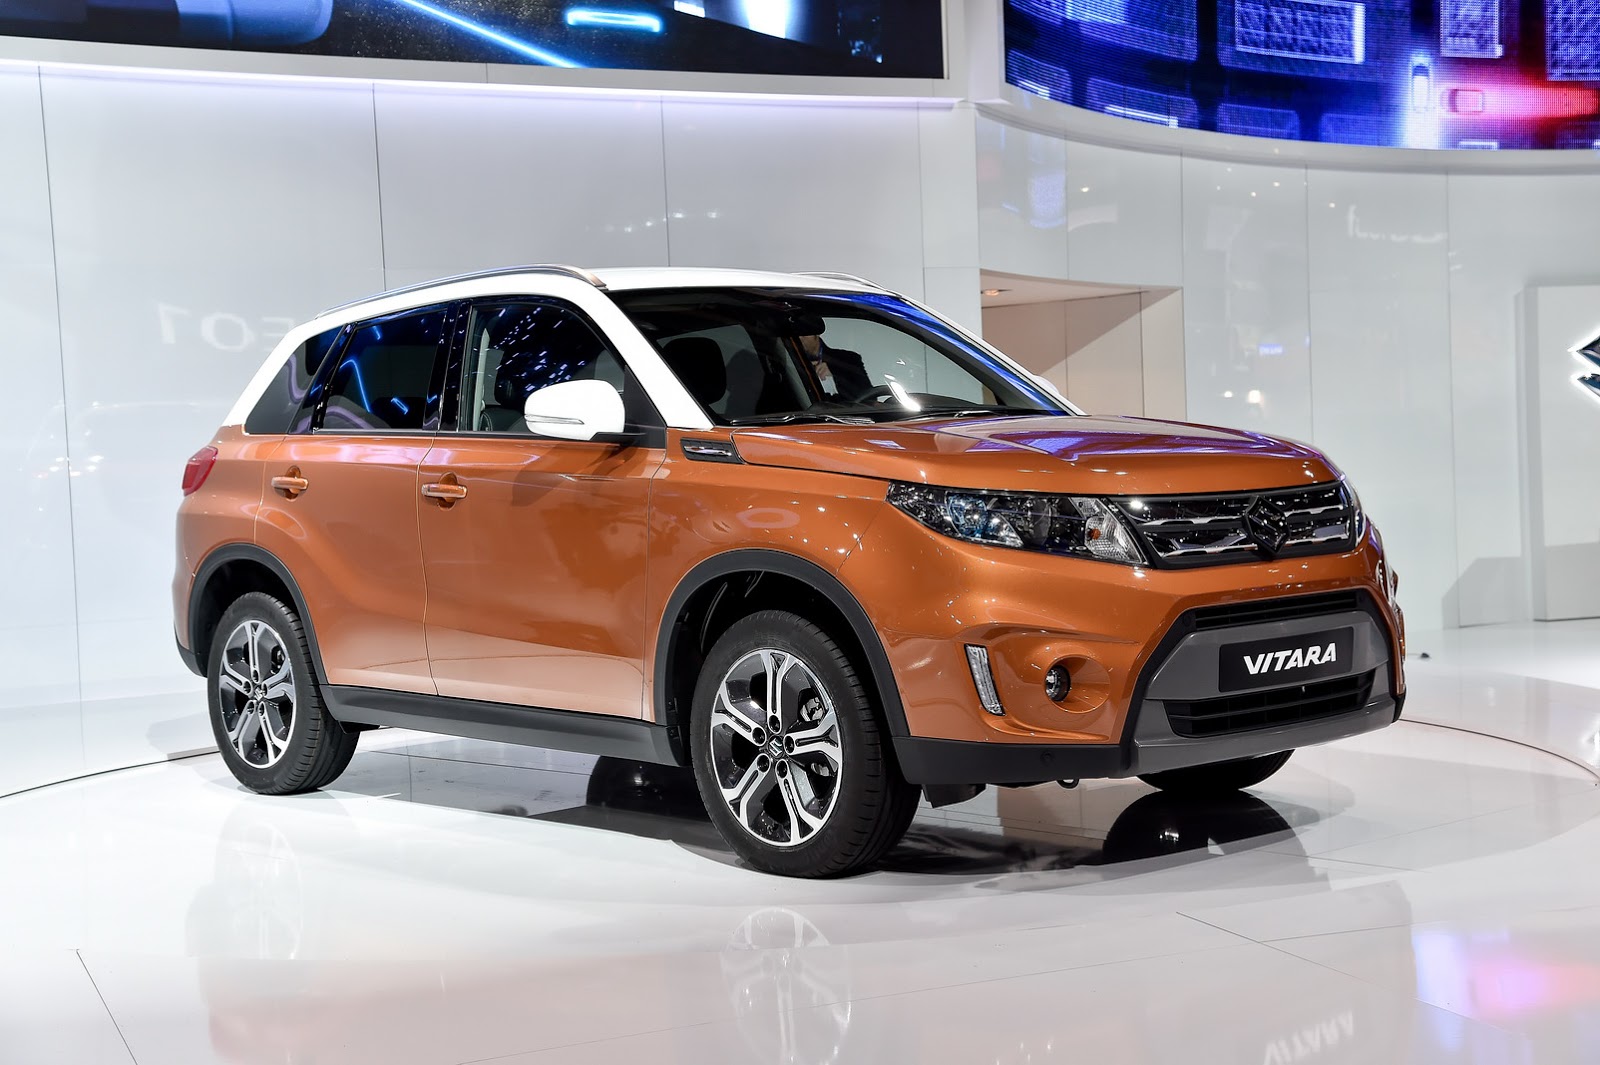 New Suzuki Vitara Compact SUV Could be Mistaken for a